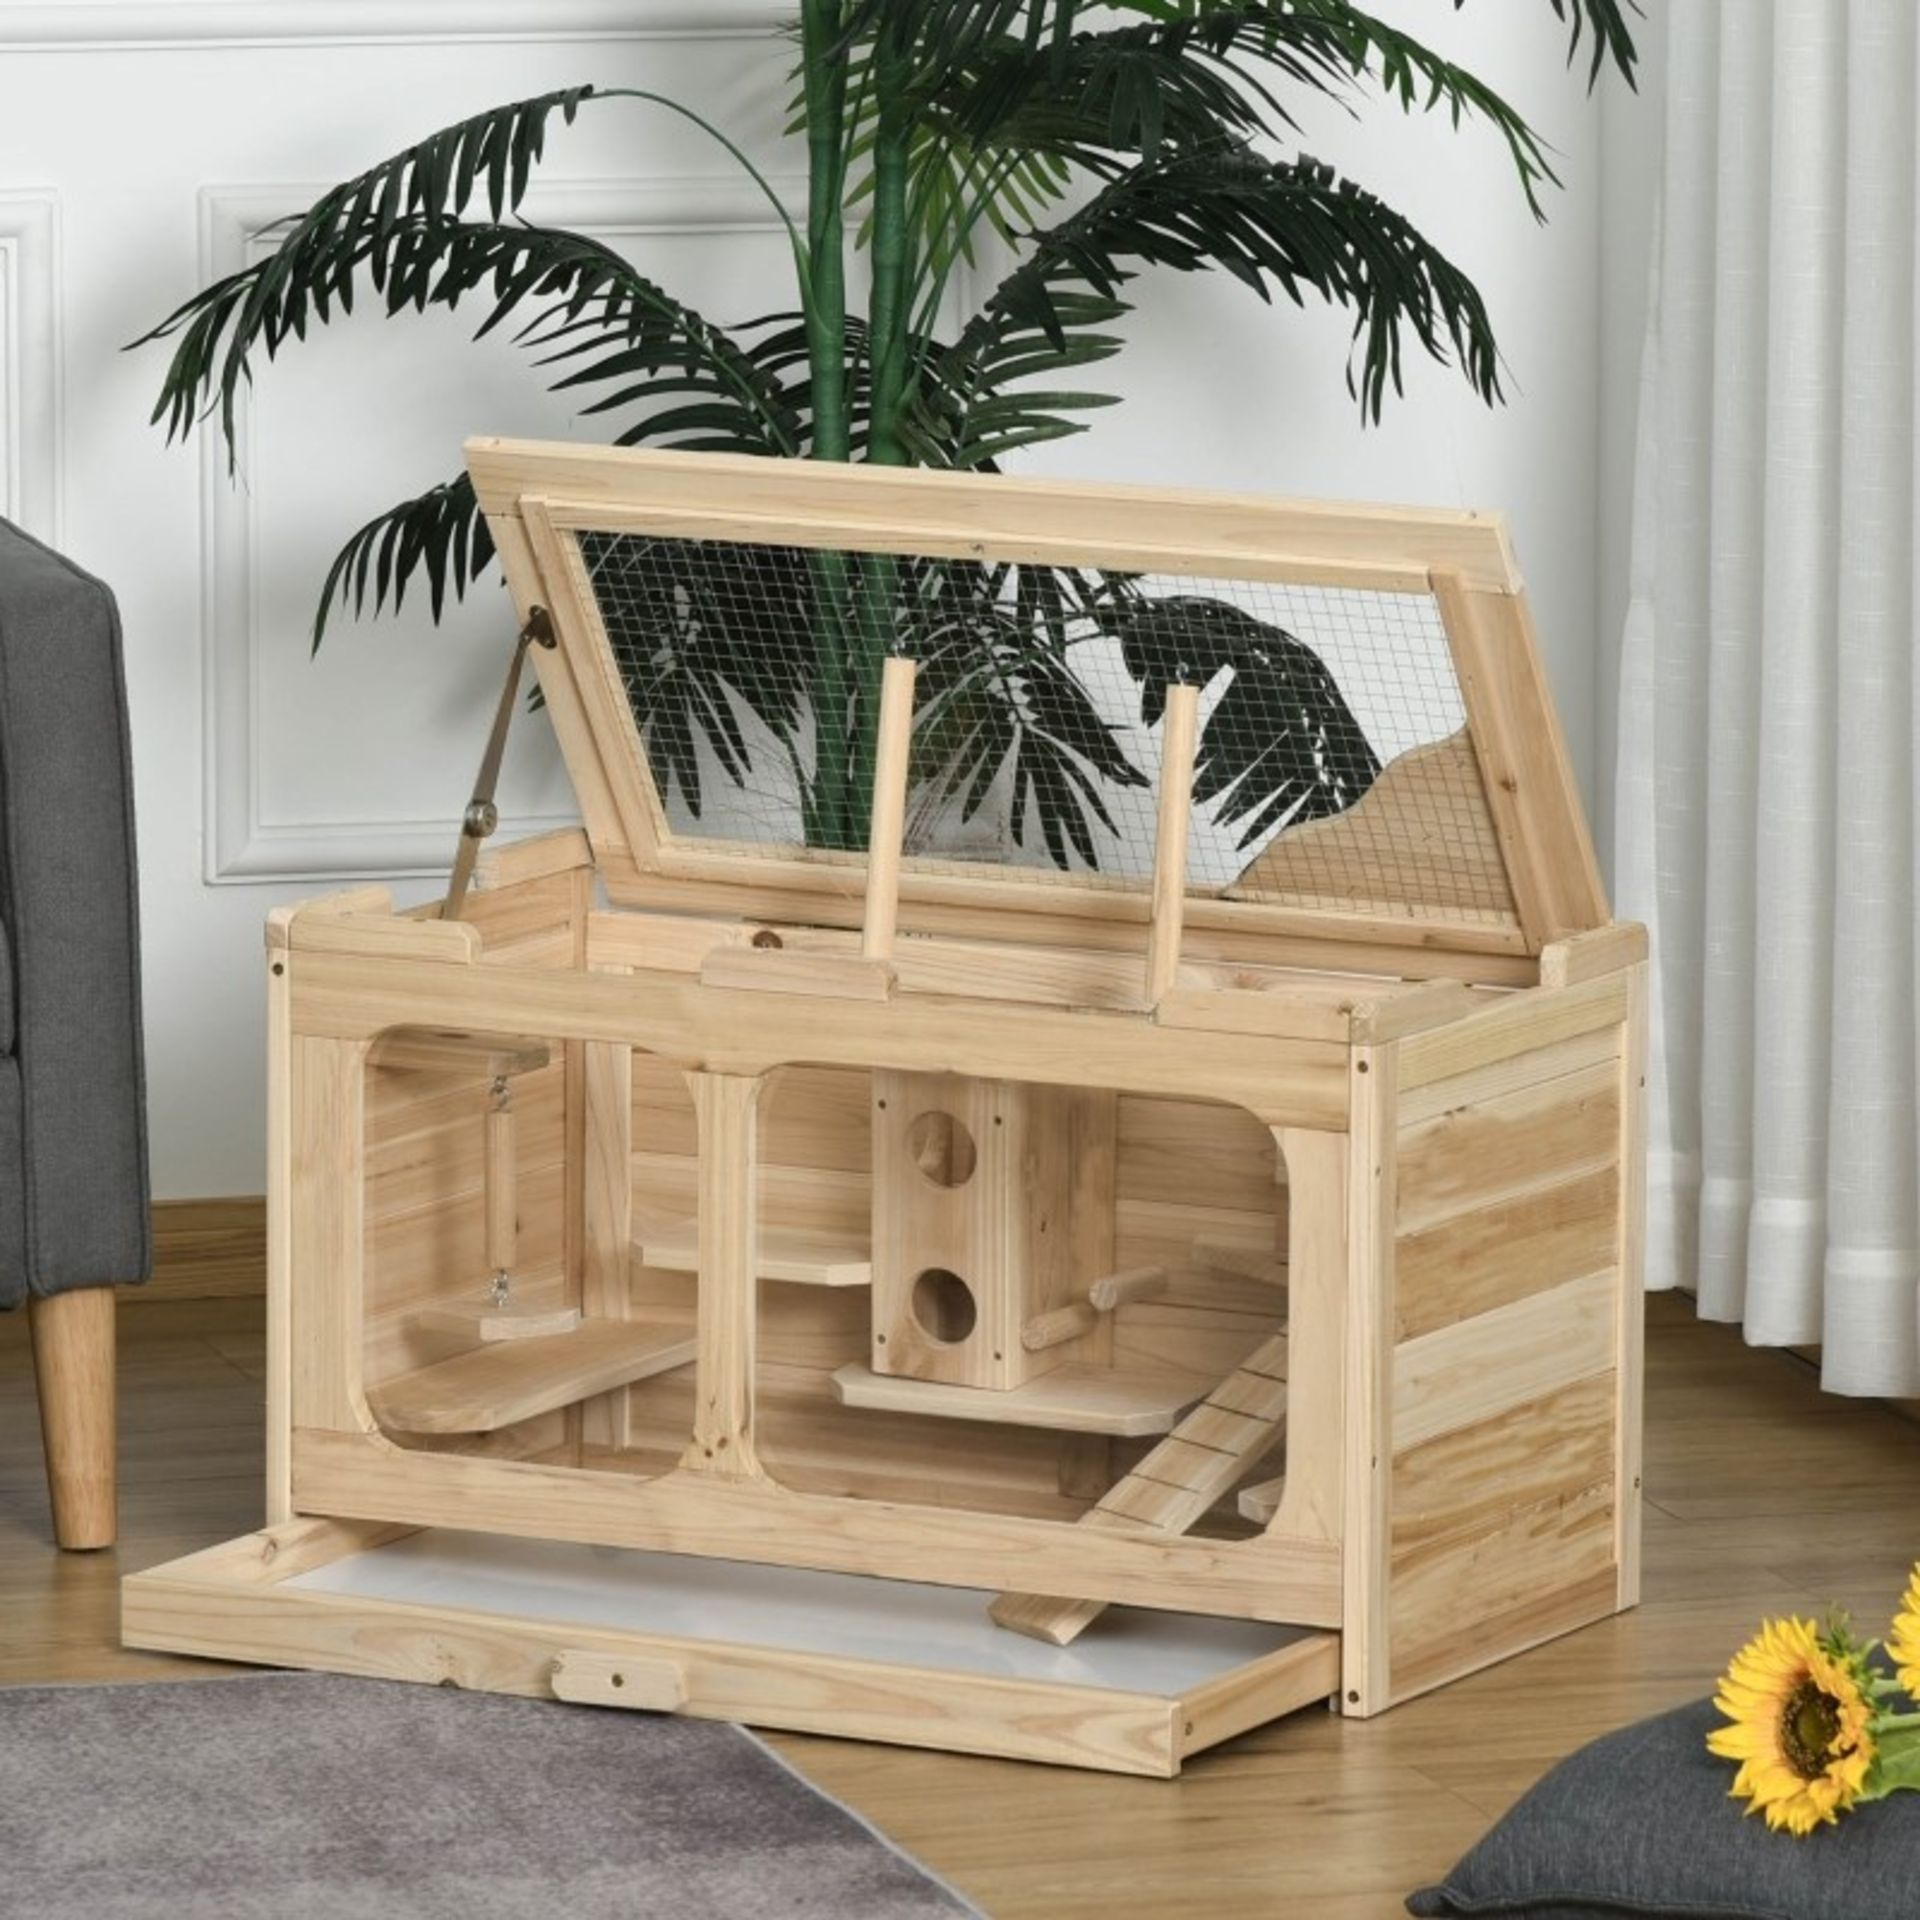 RRP £93.99 - Wooden Hamster Cage Rodent Small Animal Kit Play House for Indoor - PRODUCT DETAILS: